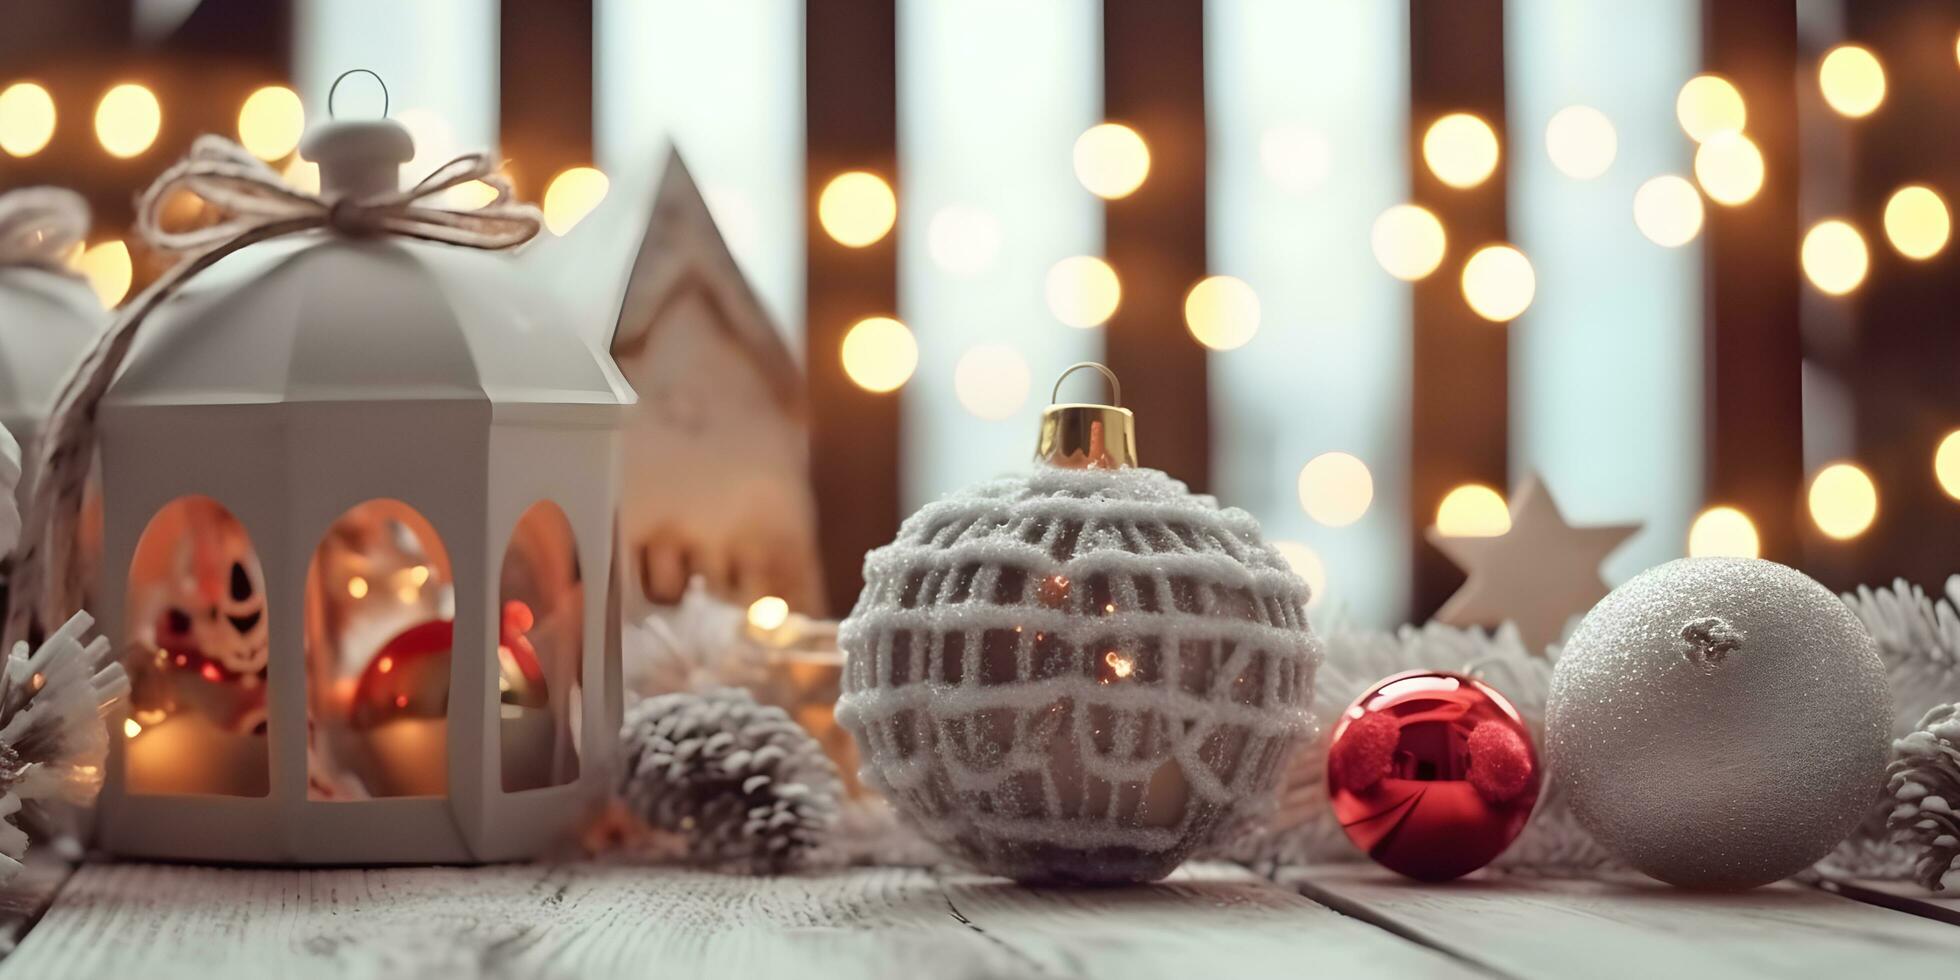 Miniature wooden house over blurred Christmas decoration background photo